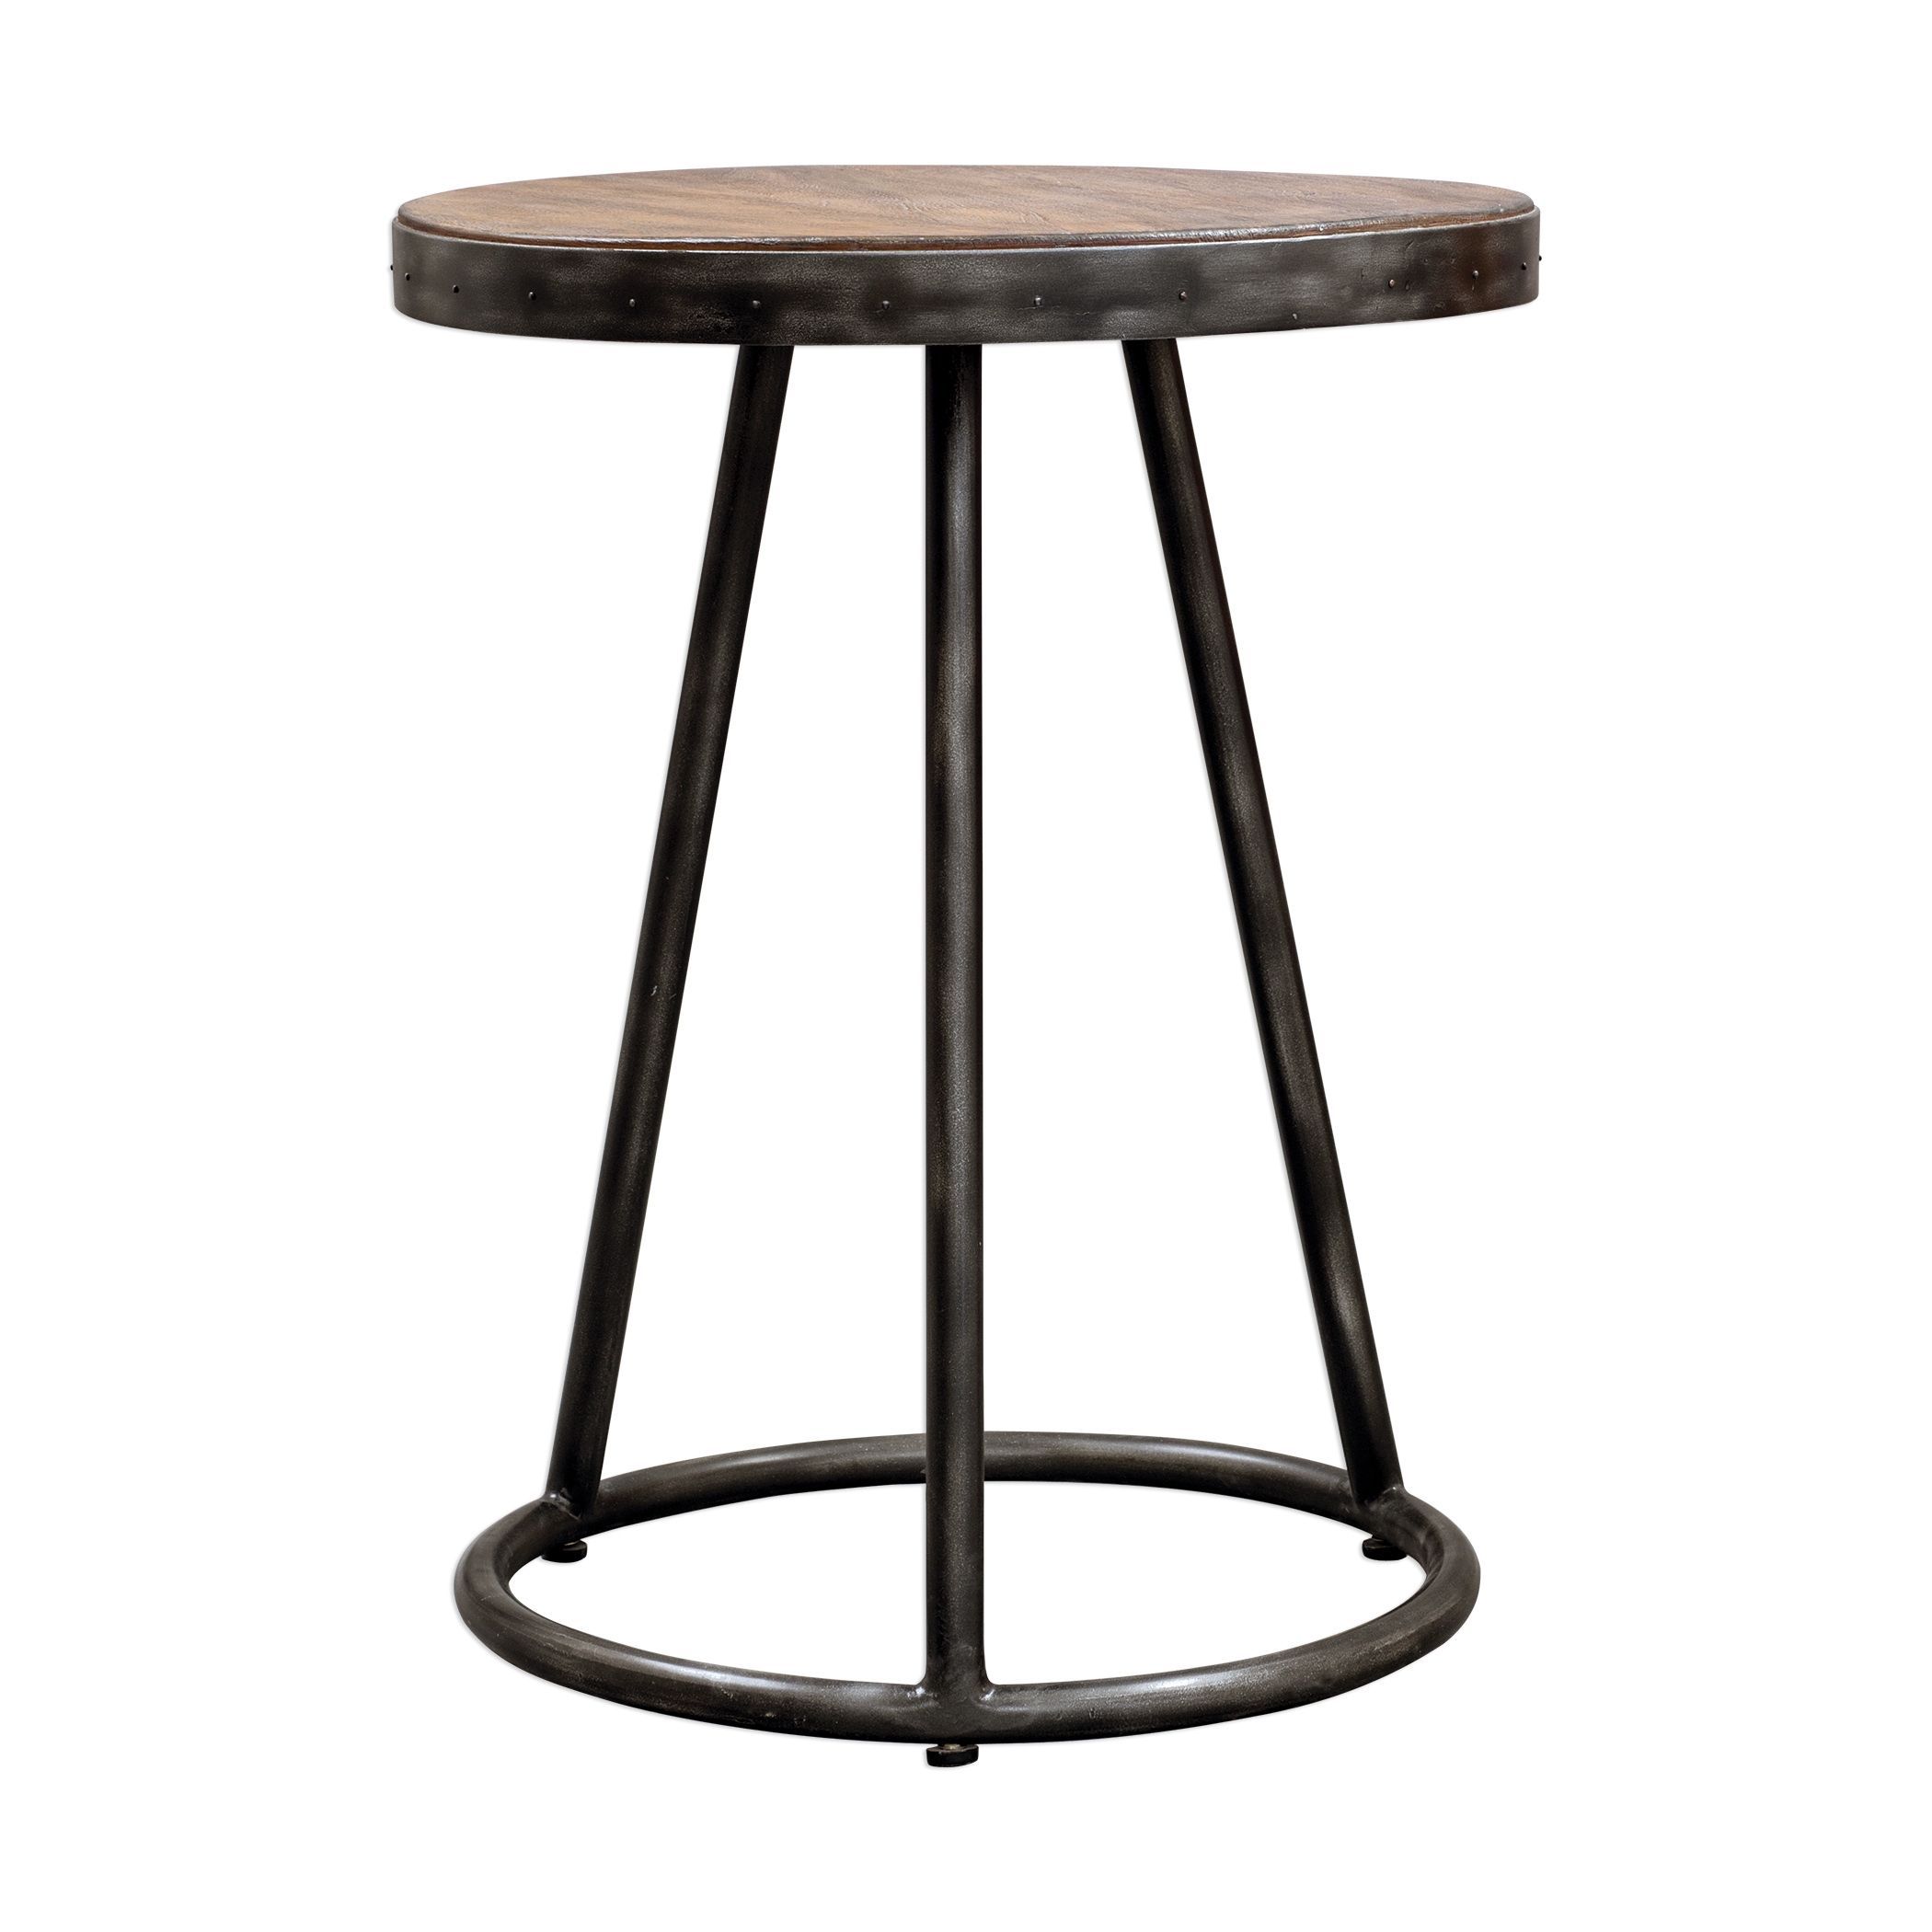 Hector Round Accent Table - Image 2